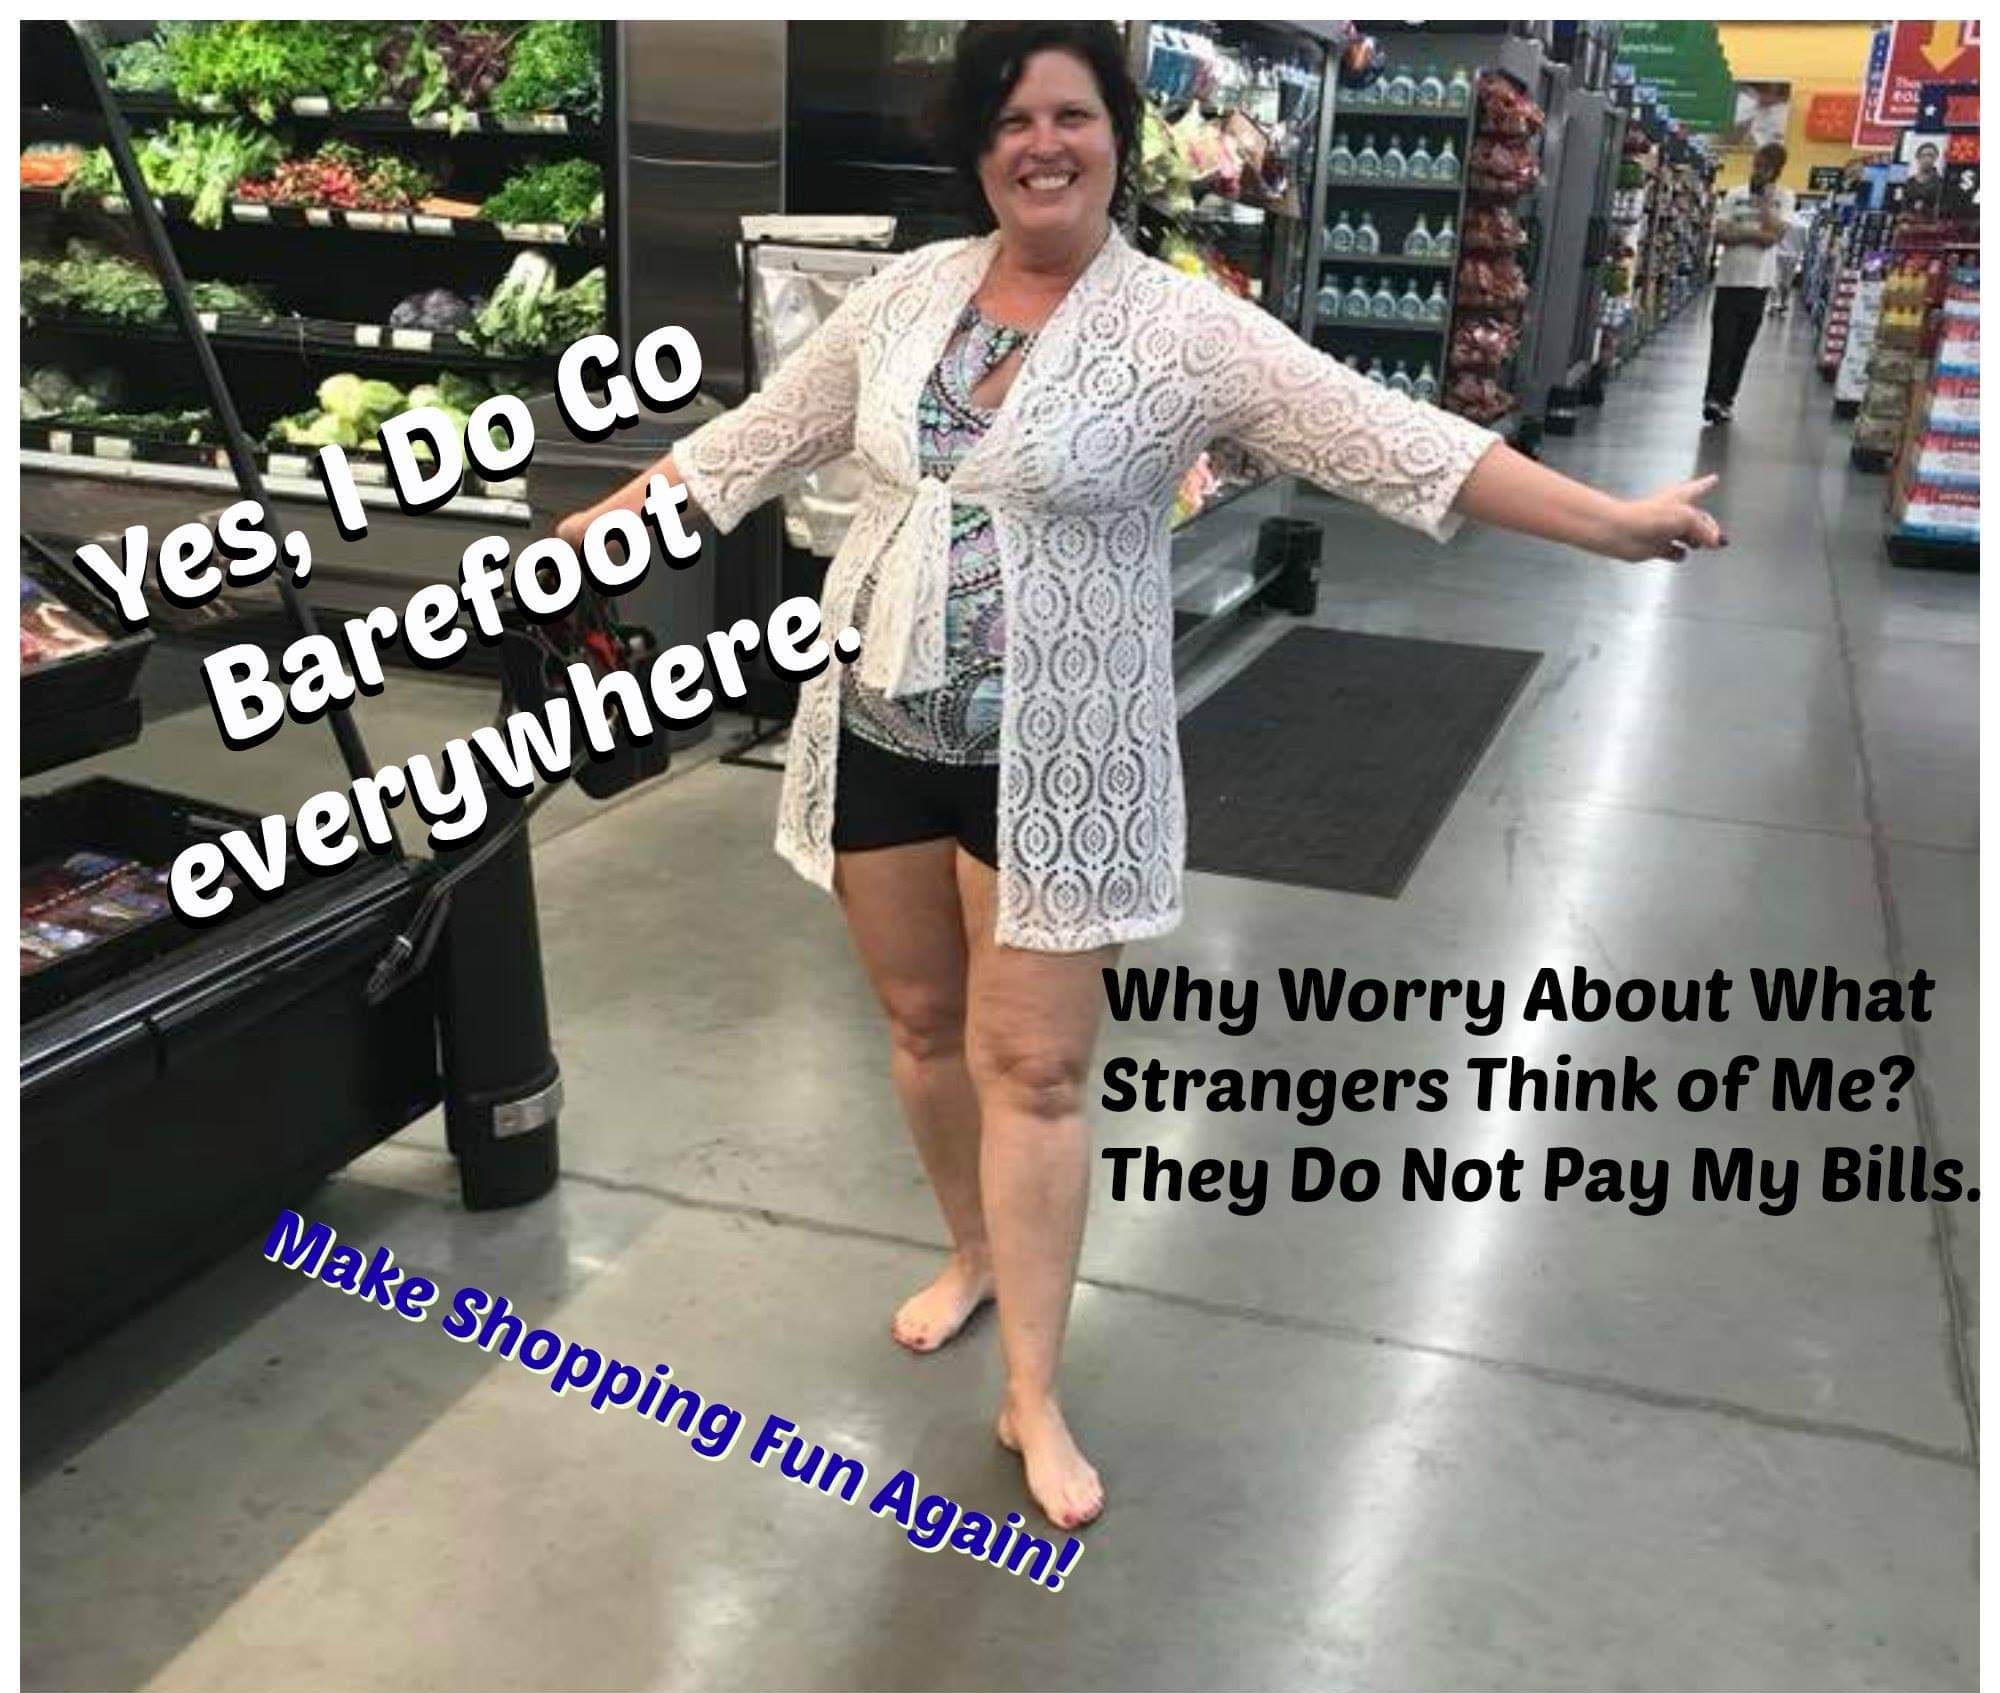 trashy people - barefoot grocery shopping - Yes, I Do Go Barefoot everywhere! Why Worry About What Strangers Think of Me? They Do Not Pay My Bills. Make Shopping Fun Again!